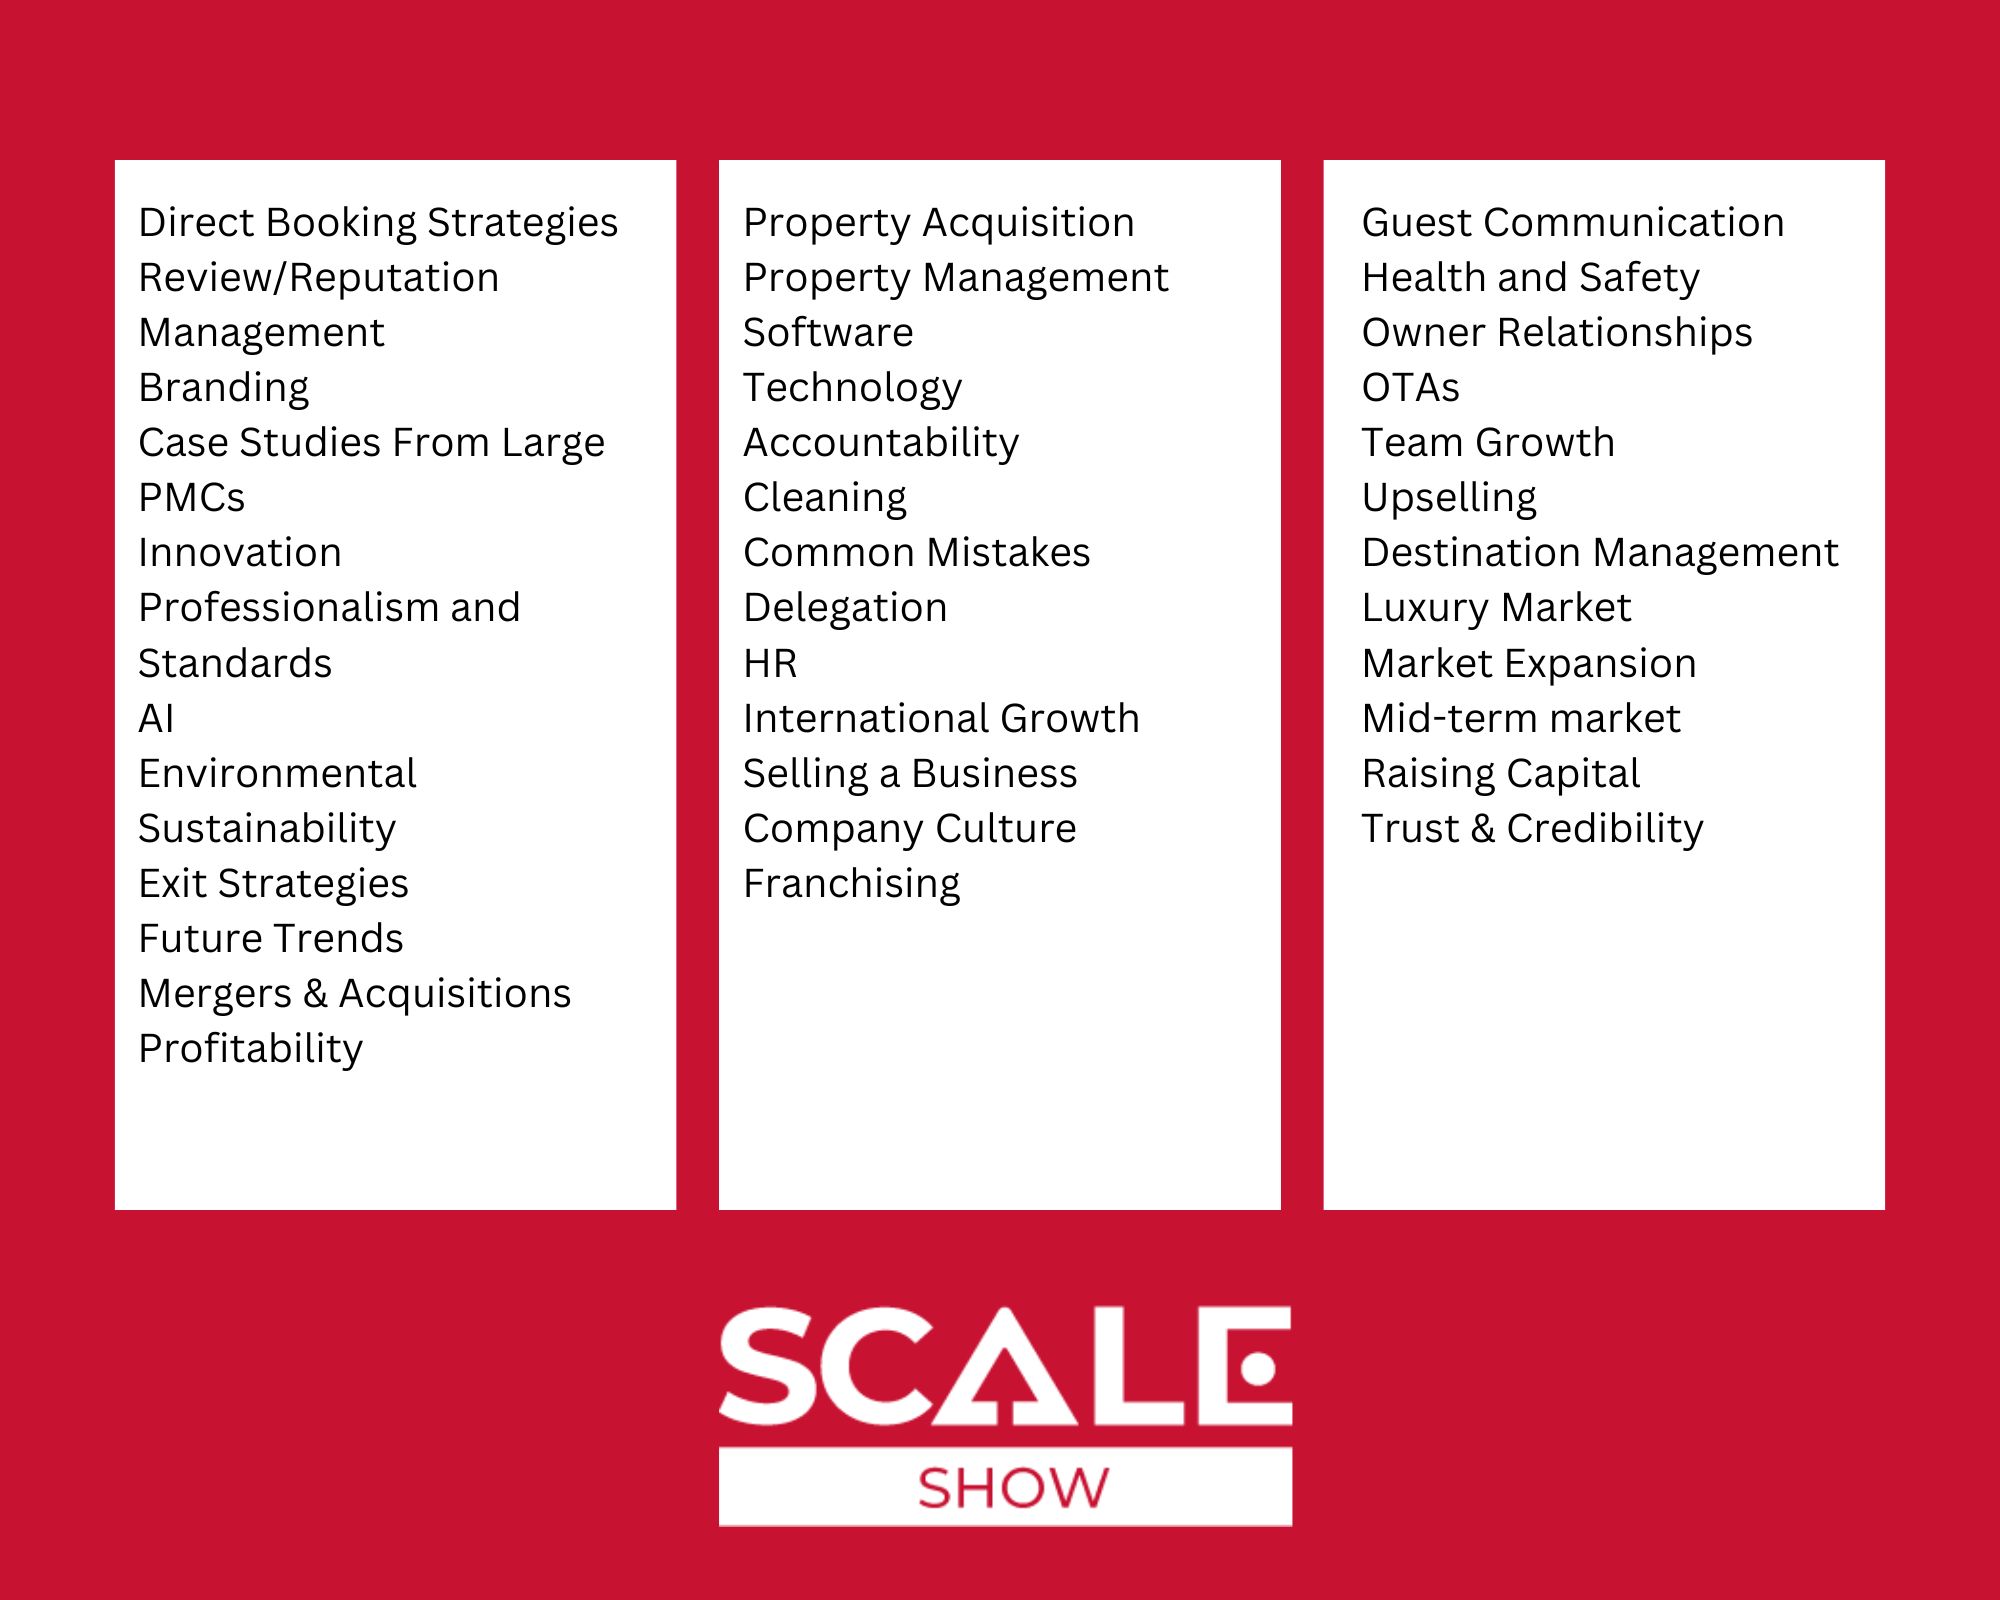 Scale Show Top topics table